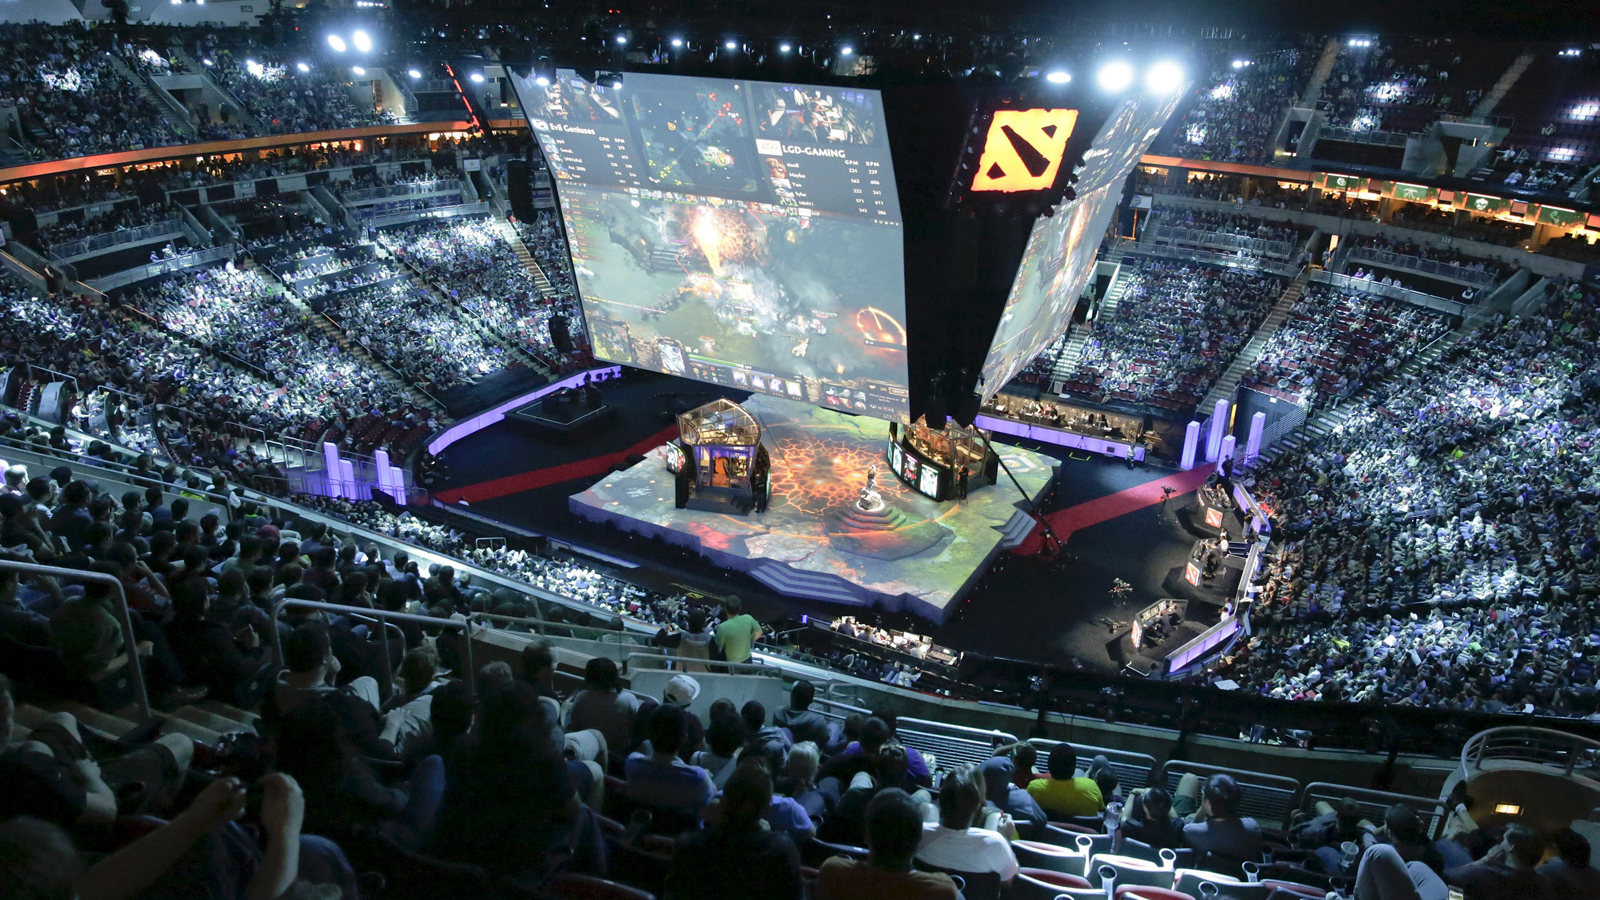 5 biggest esports tournaments and leagues in the world G2G News